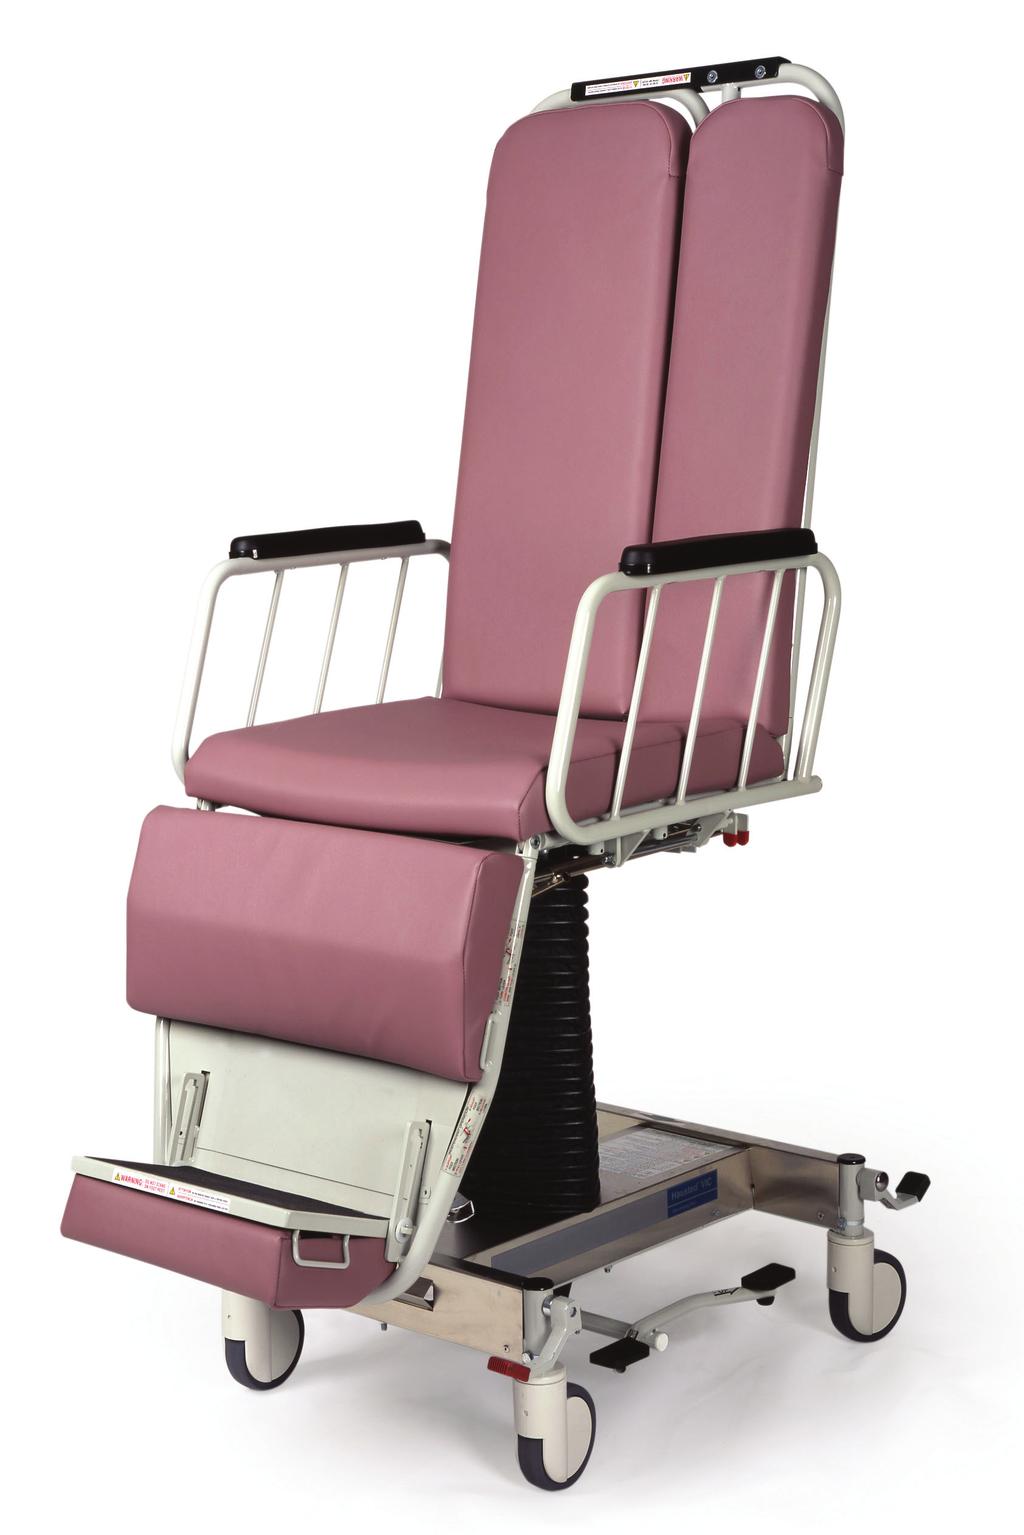 Operating Manua Hausted Video Imaging Chairs Modes: